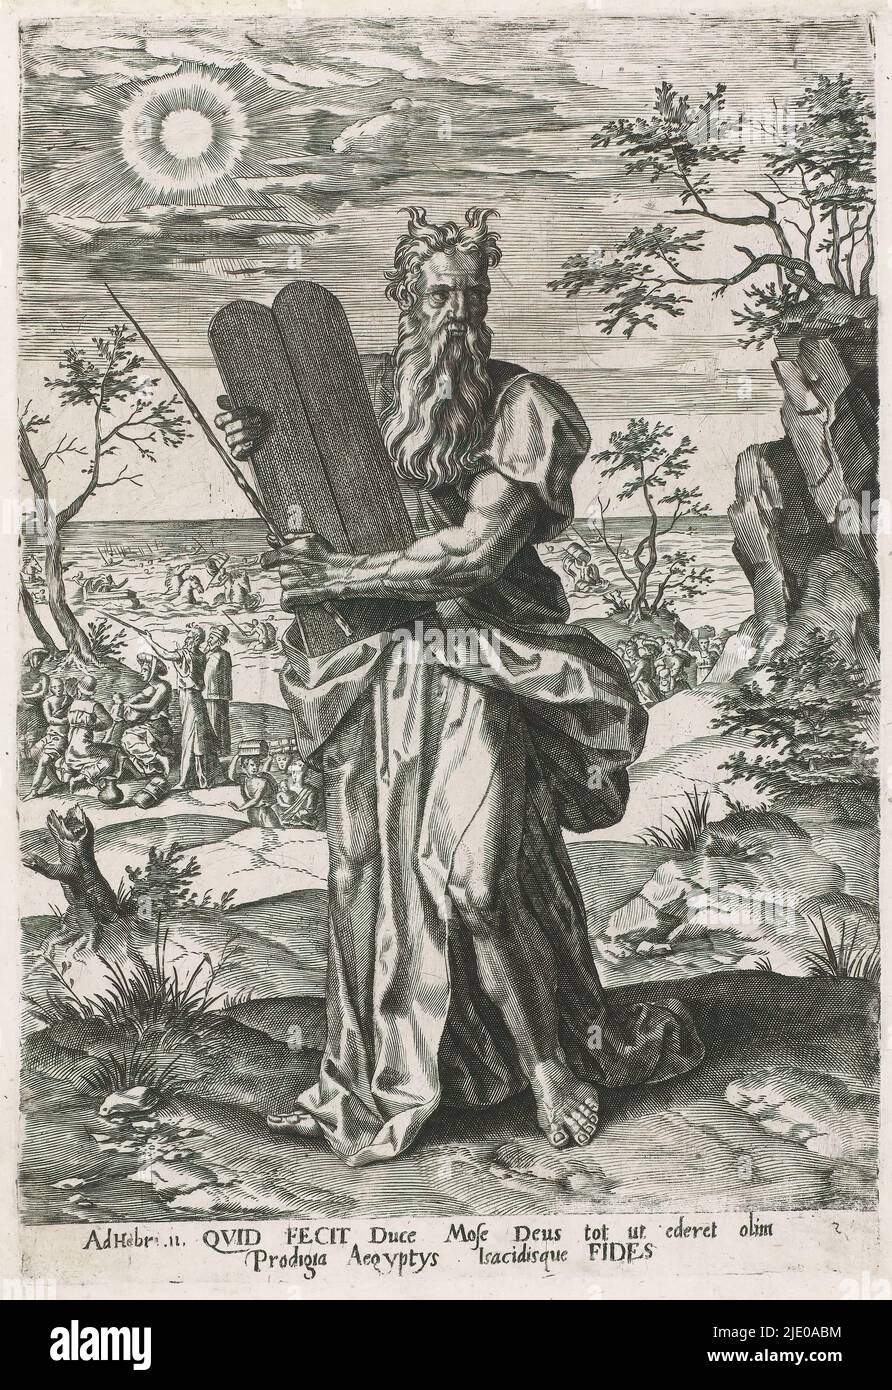 Moses with the tablets of the law, The letter to the Hebrews chapter 11 (series title), Moses holds two stone tablets on which the ten commandments are written; the tablets of the law. In the background scenes of the exodus from Egypt. Below the image is a two-line text in Latin, numbered mirrored in the right margin: 5. The print is part of a series of prints on the Letter to the Hebrews chapter 11., print maker: Pieter Jalhea Furnius, 1550 - 1625, paper, engraving, height 292 mm × width 199 mm Stock Photo